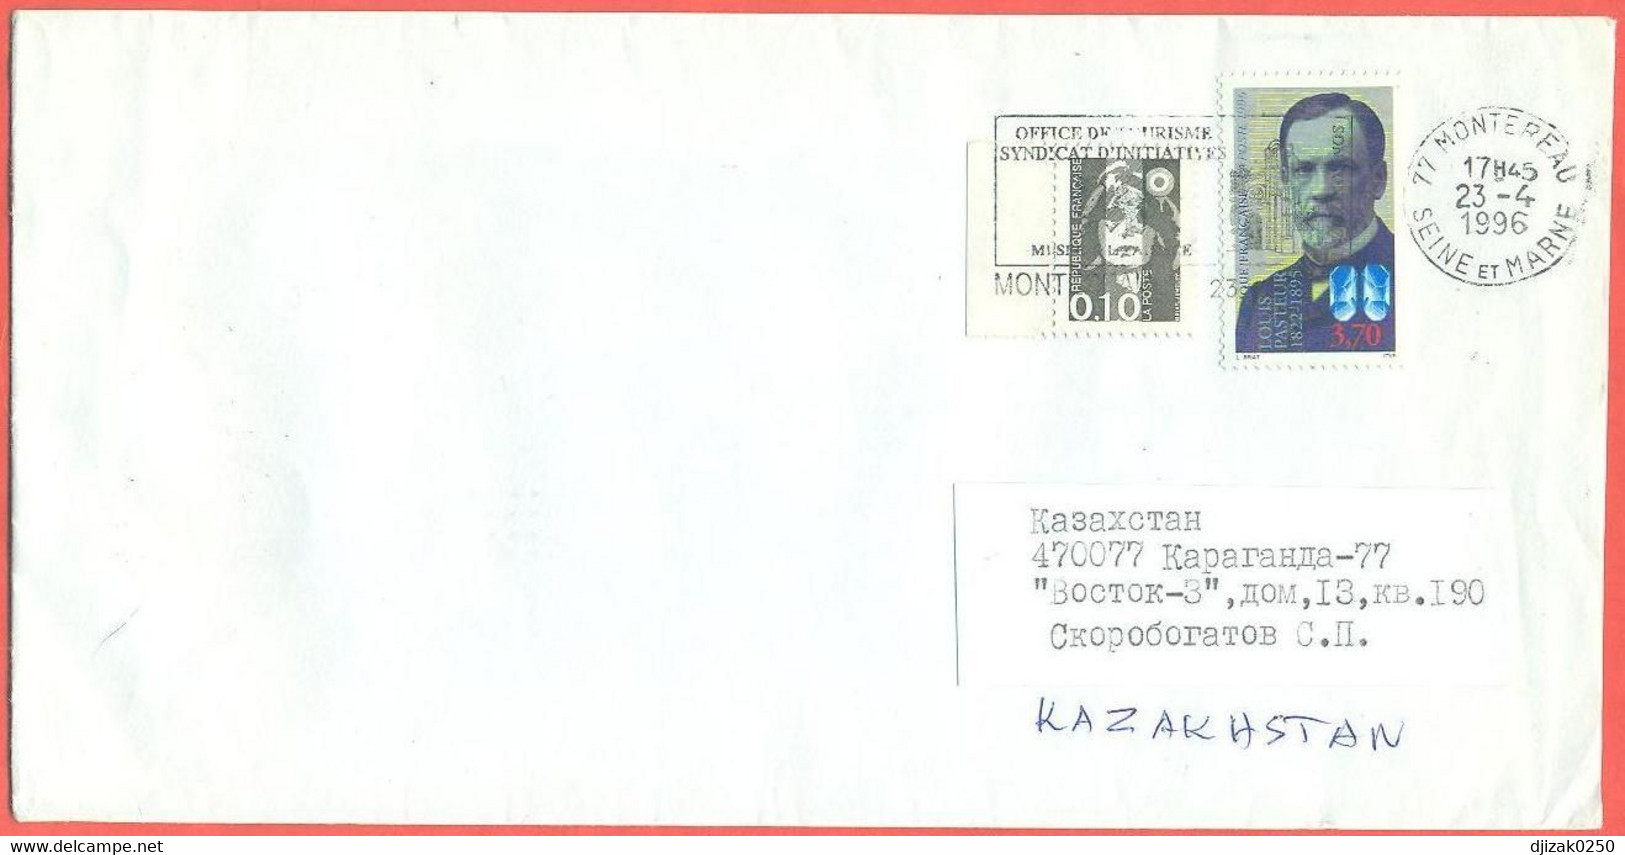 France 1996. The Envelope Passed Through The Mail. - Louis Pasteur